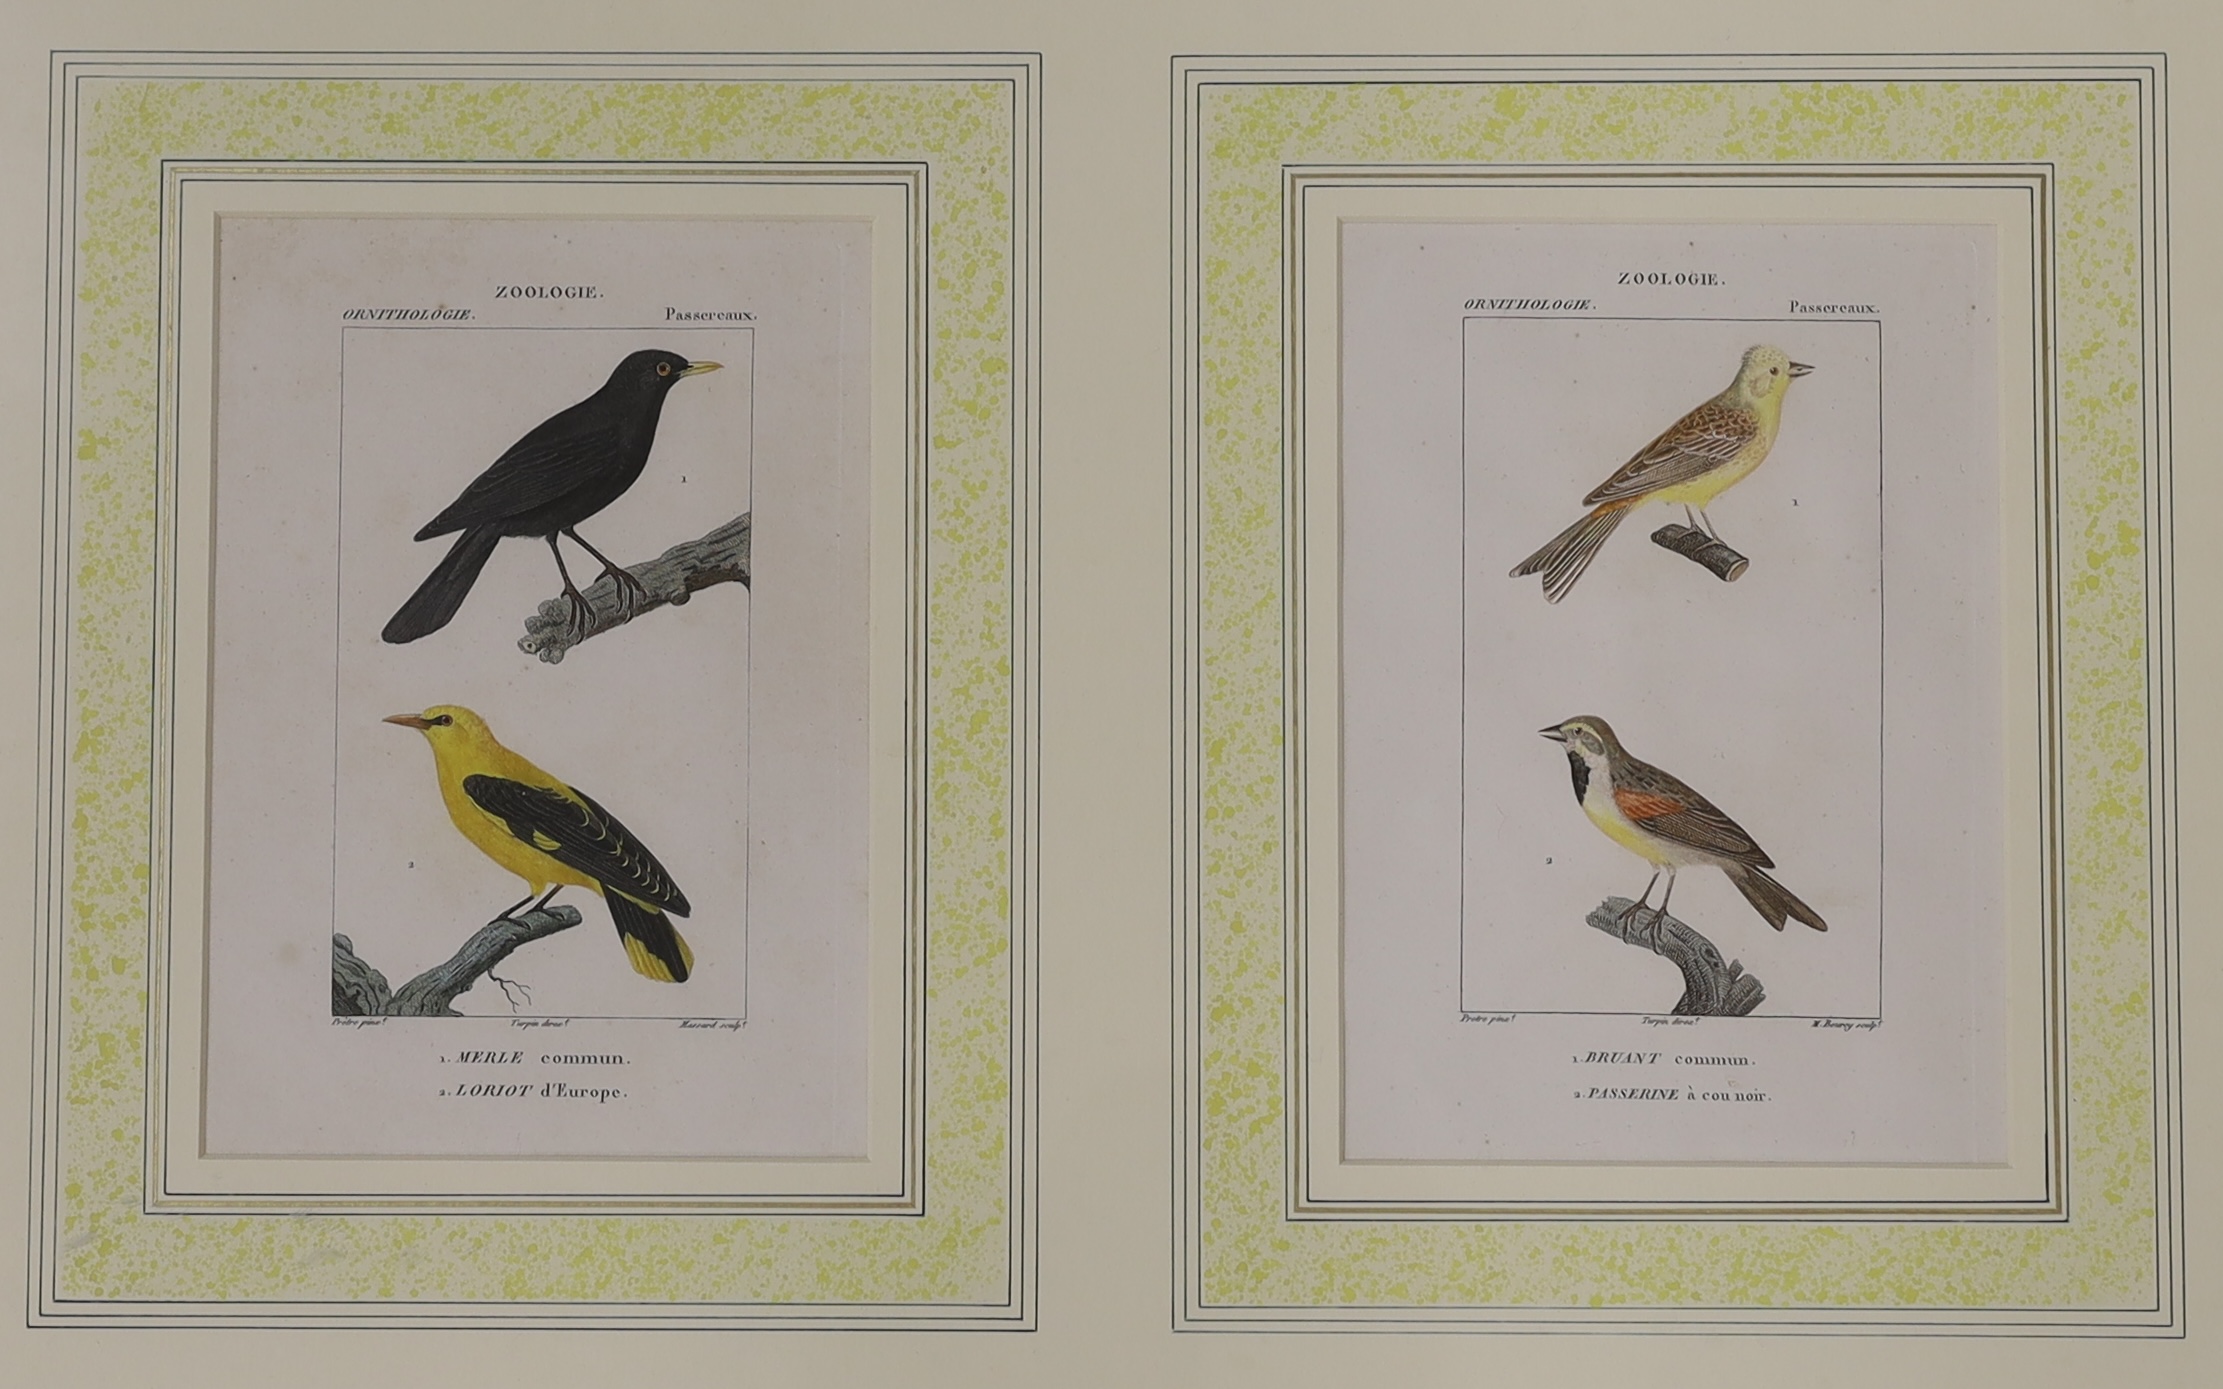 Two 19th century hand coloured ornithological engravings from Turpins ‘Dictionnaire des Sciences Naturelles’, publ. 1816-1830 Paris, F G Levrault, label verso, each overall 20 x 13.5cm, framed as one